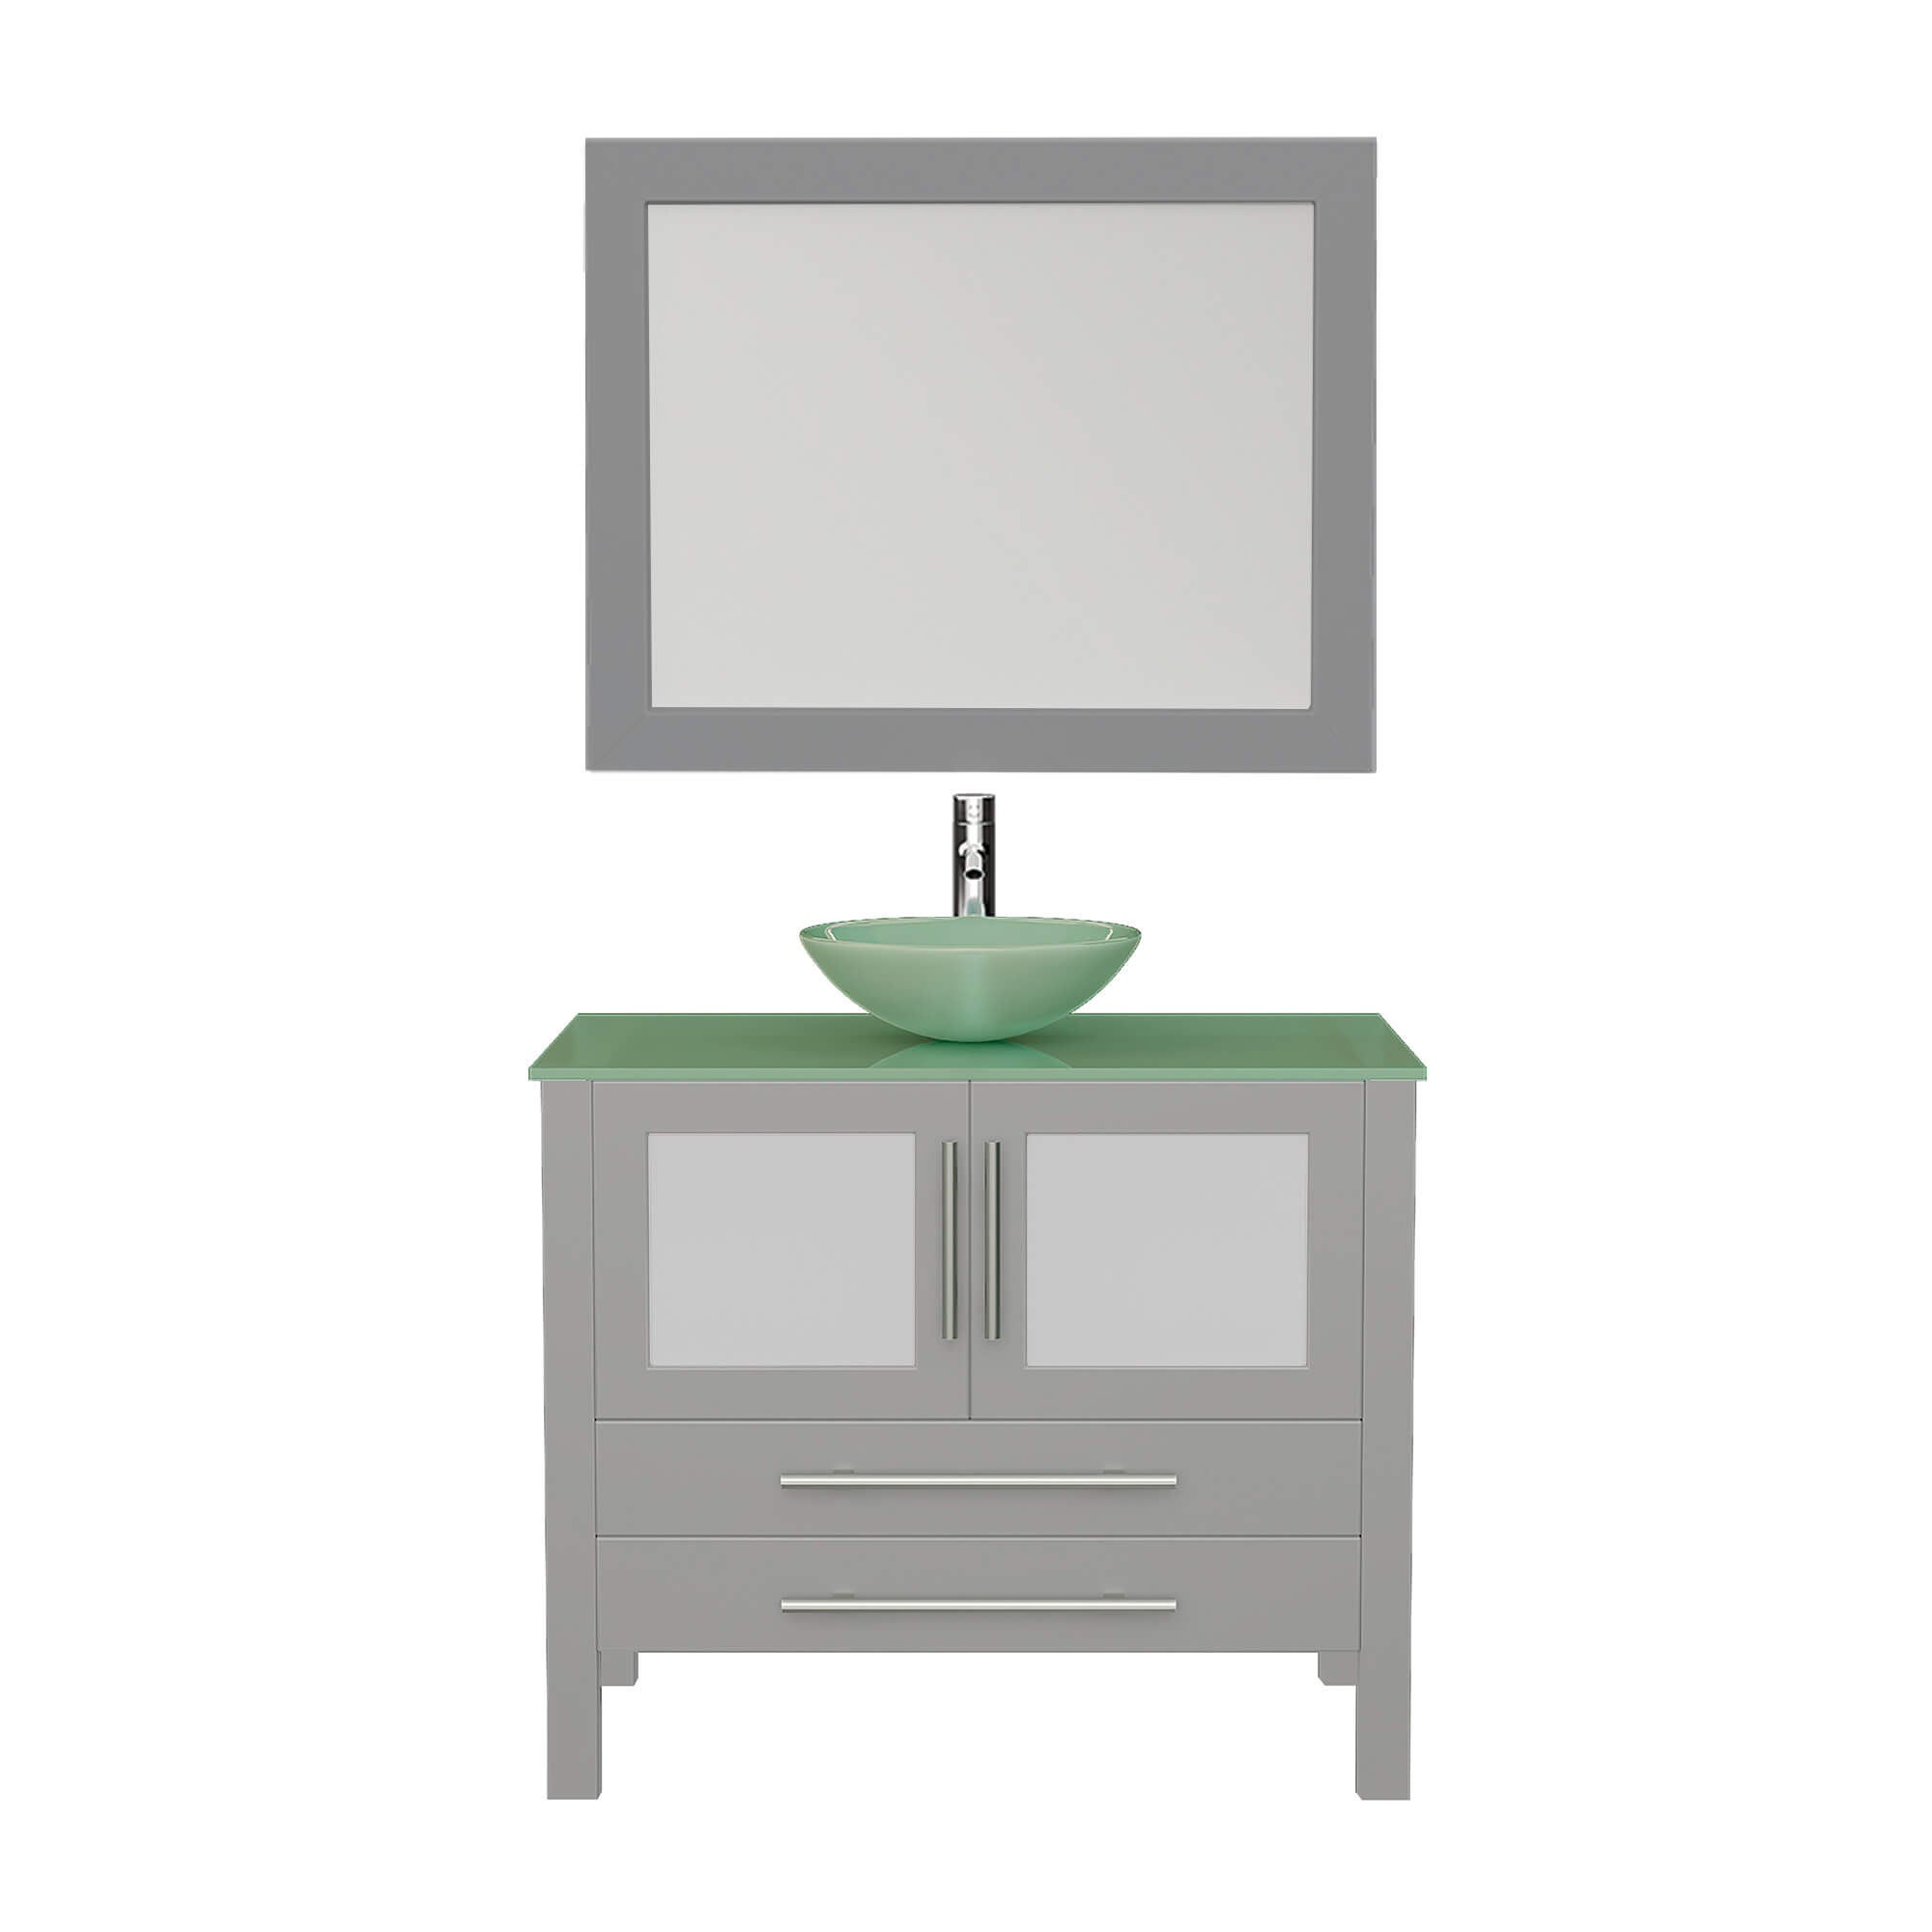 Cambridge Plumbing 8111B-G 36" Single Bathroom Vanity in Gray with Tempered Glass Top and Vessel Sink, Matching Mirror, Front View with Chrome Faucet